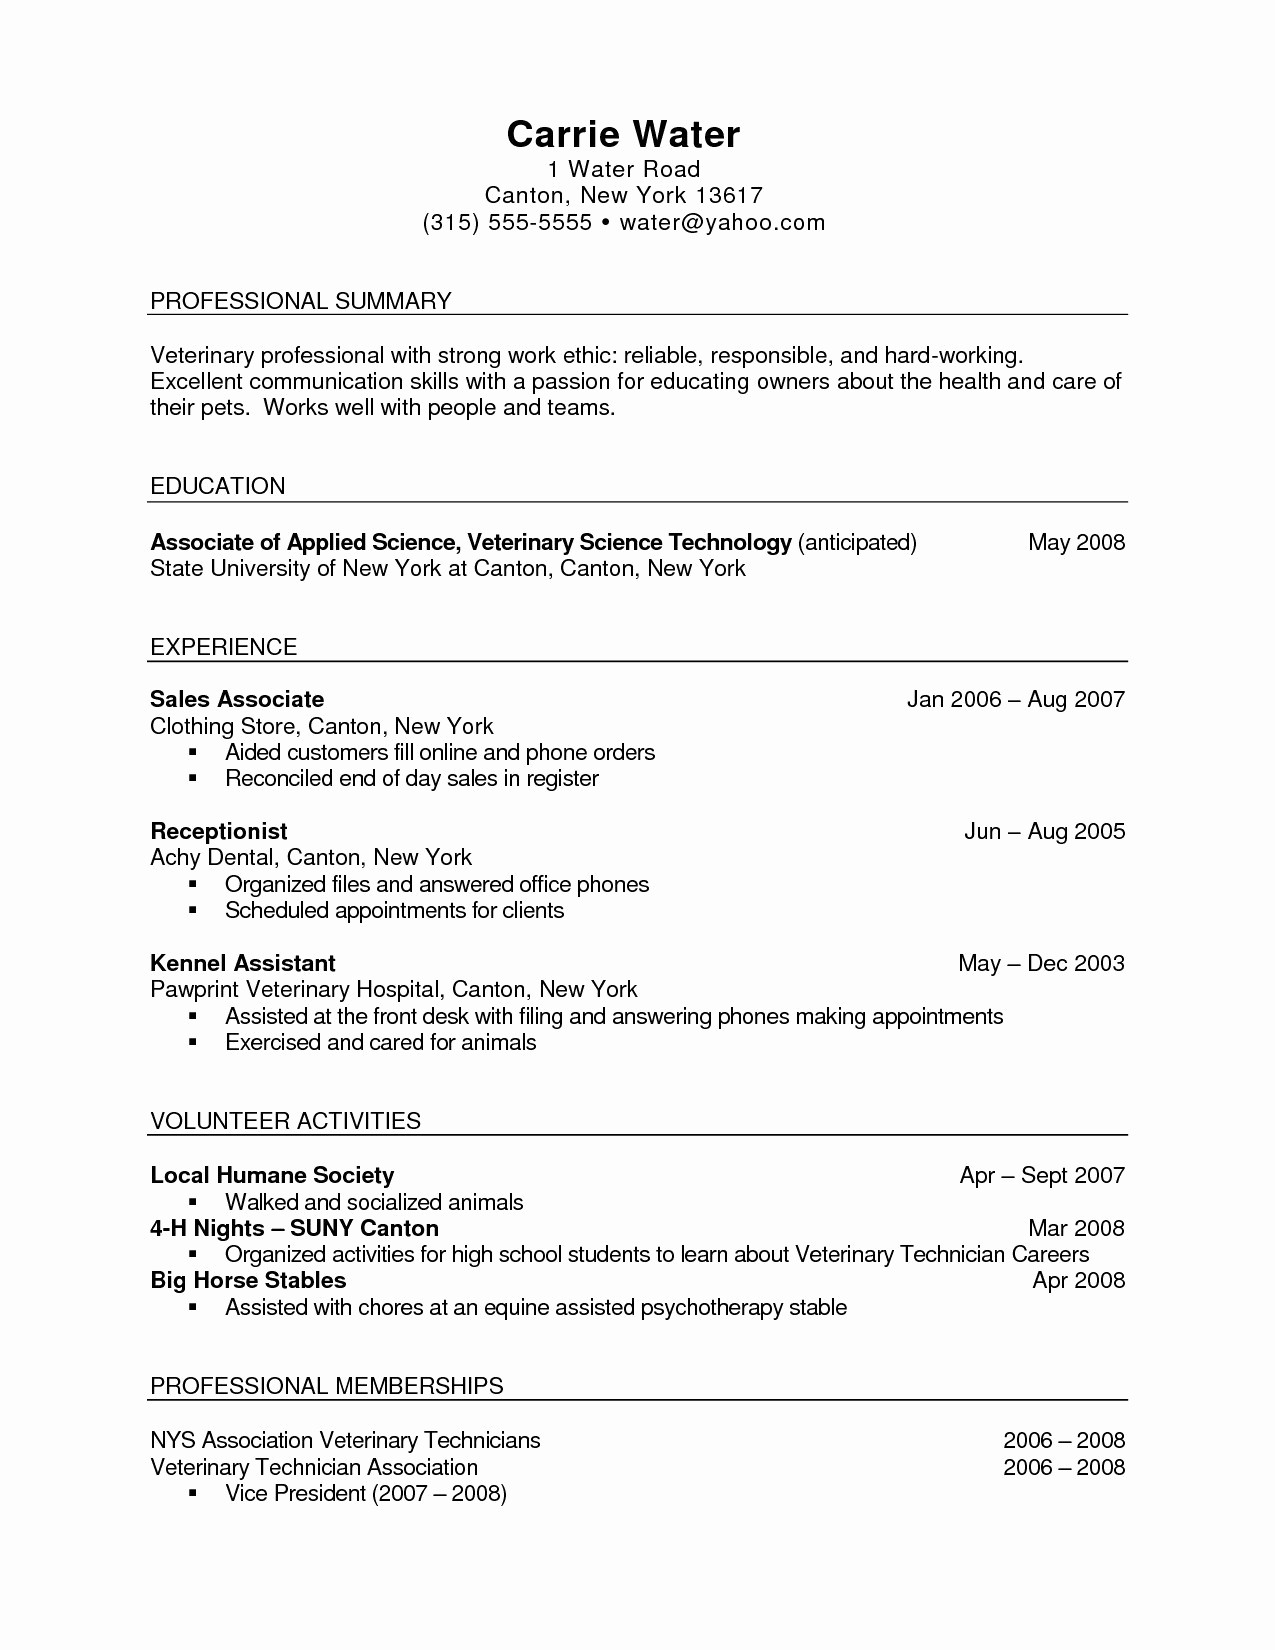 Entry Level Resume Cover Letter Best Of Entry Level Cover Letter Sample No Experience Best How